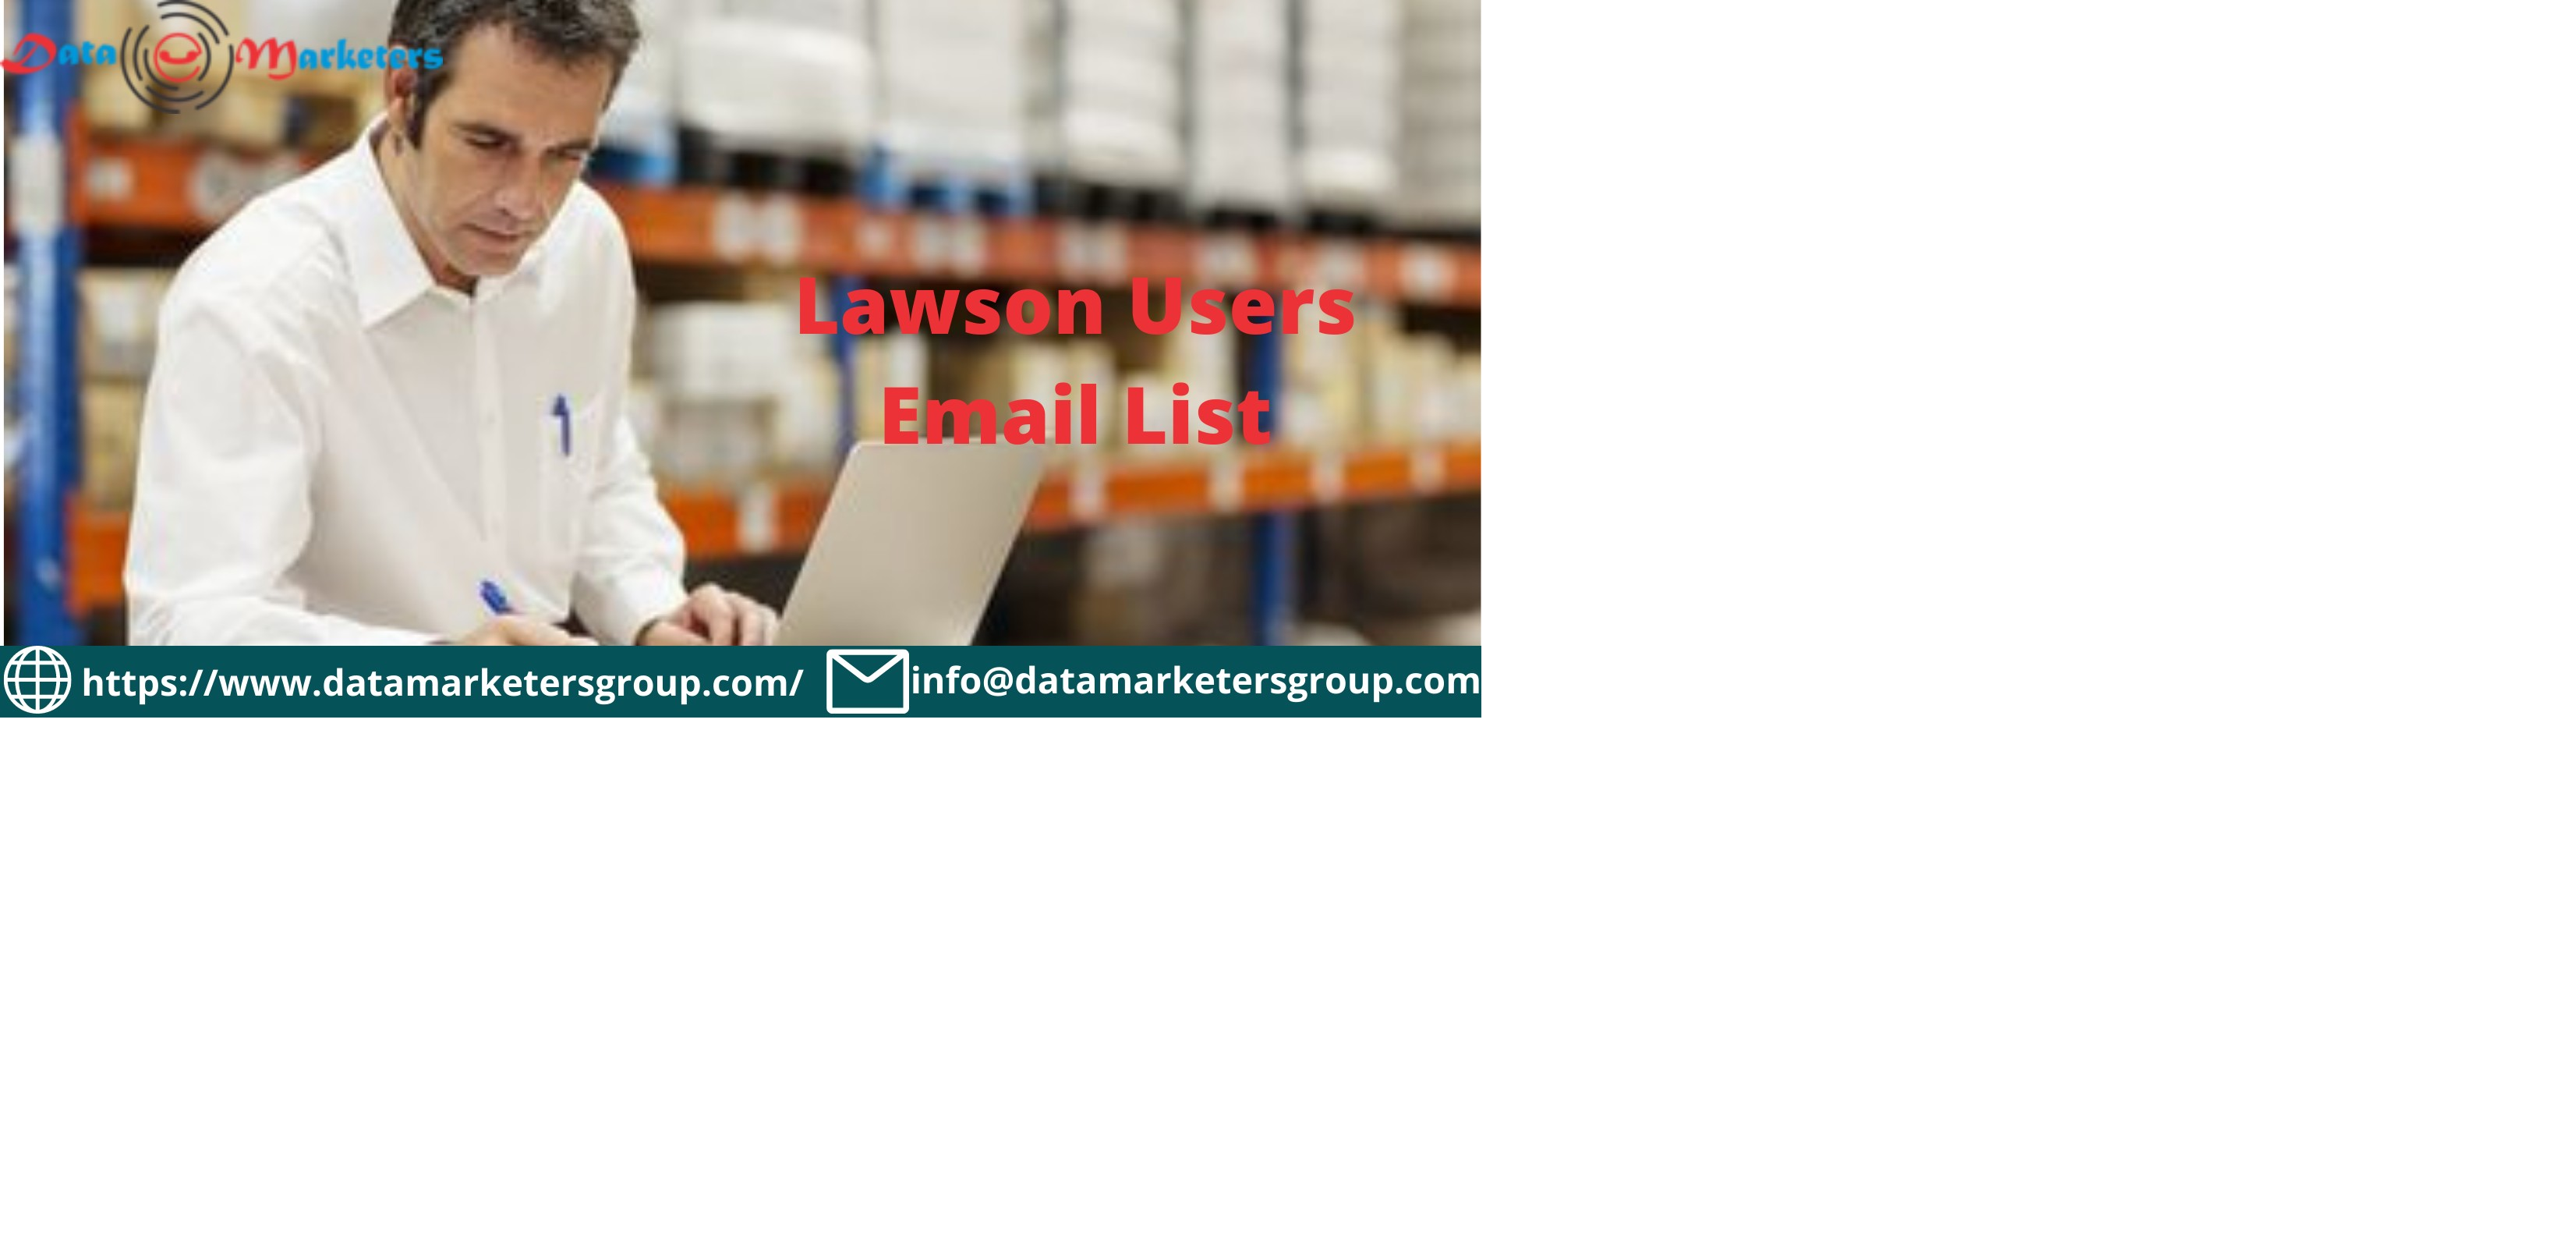 Lawson Users Email List